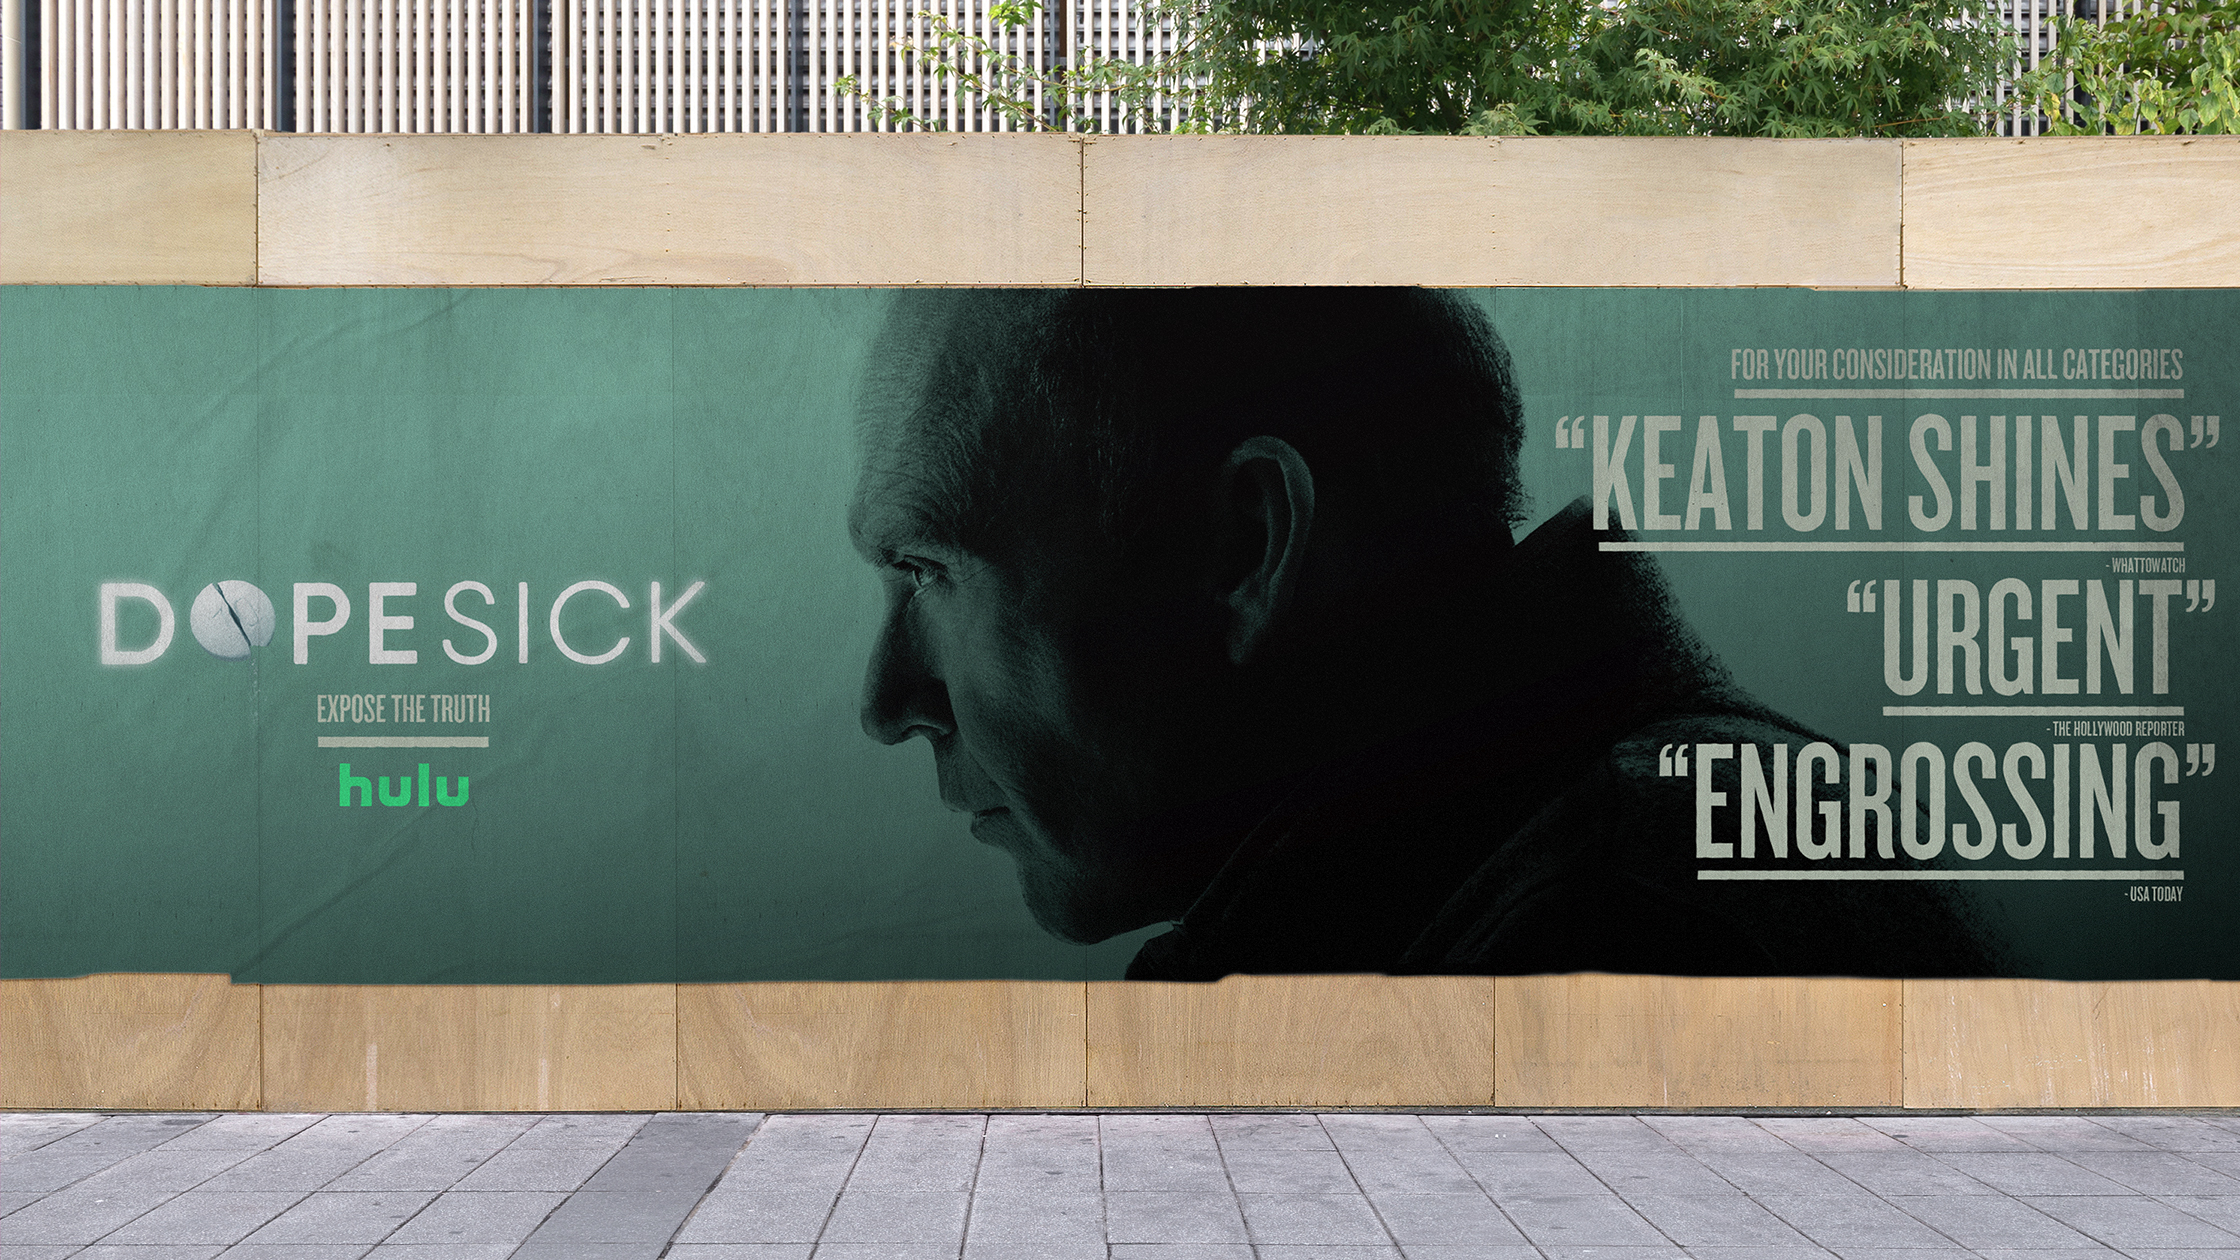 Dopesick FYC campaign